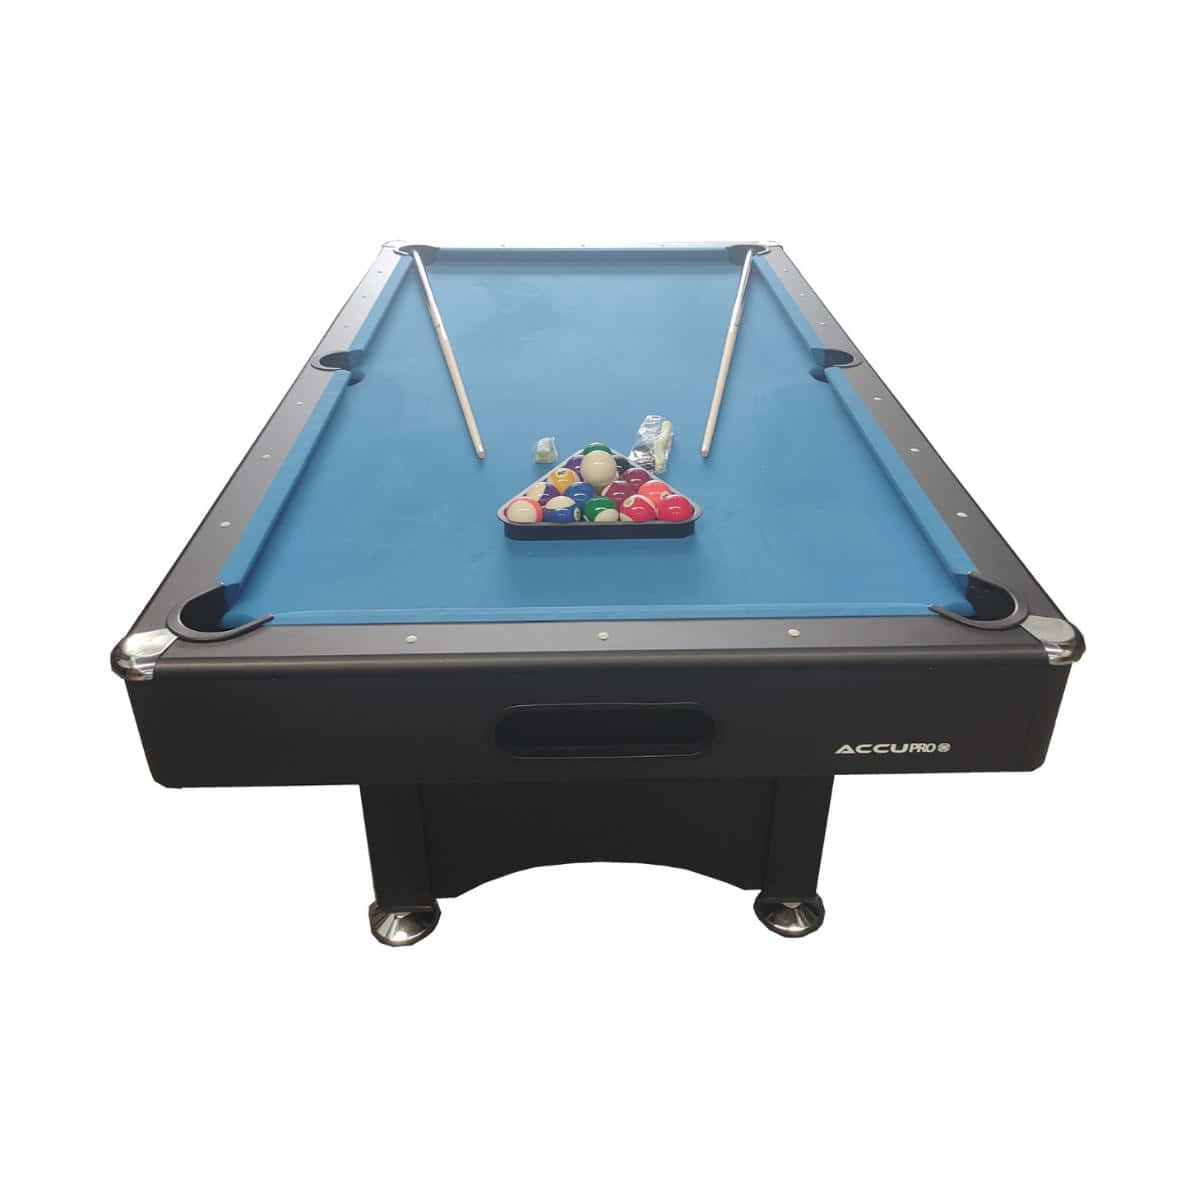 Enjoy a game of pool with friends in your own home.